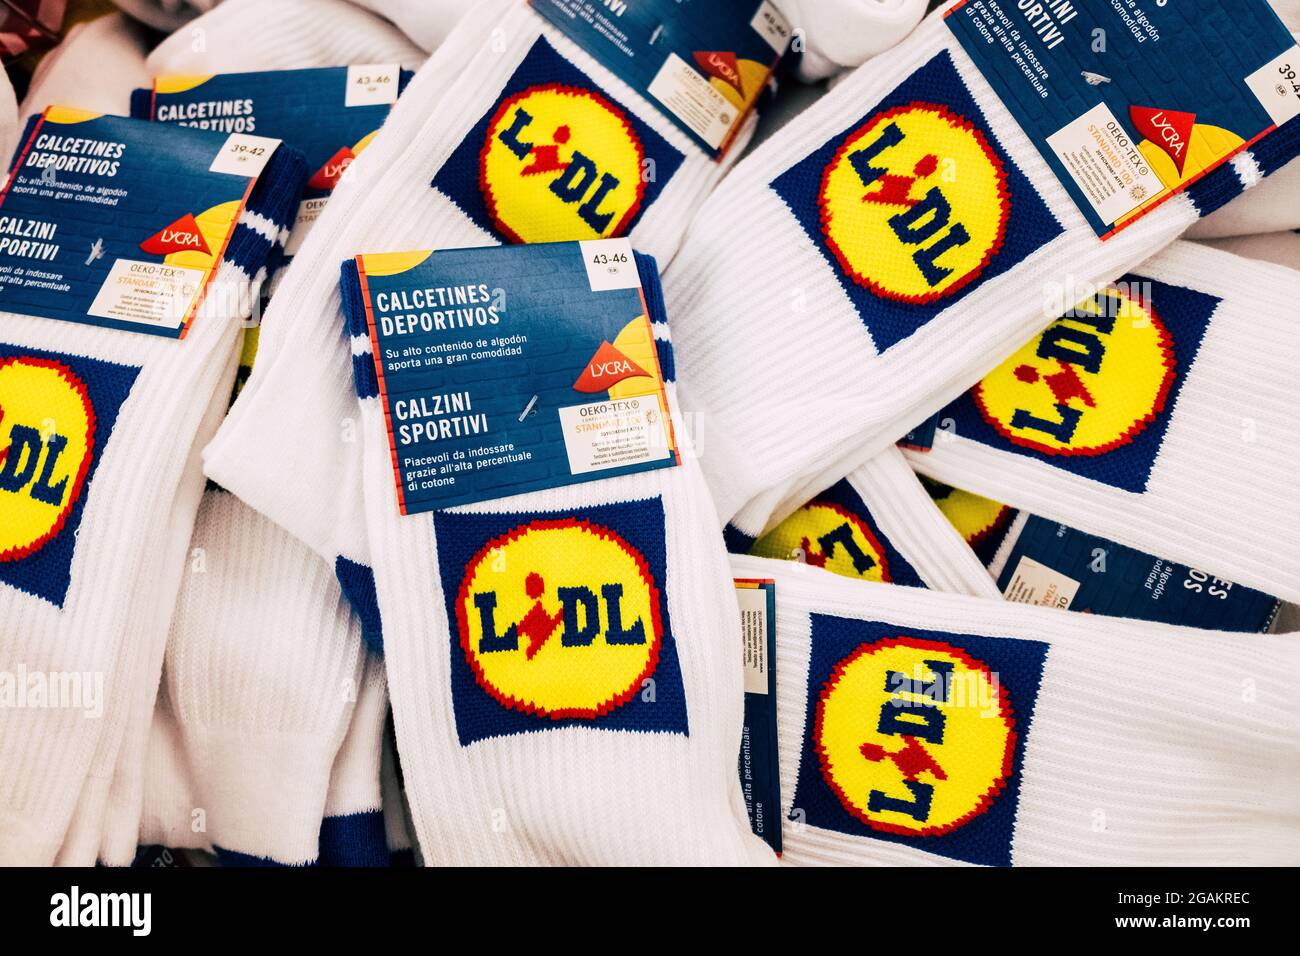 Valencia, Spain - July 30, 2021: Cotton socks with the logo of the German  supermarket chain Lidl Stock Photo - Alamy